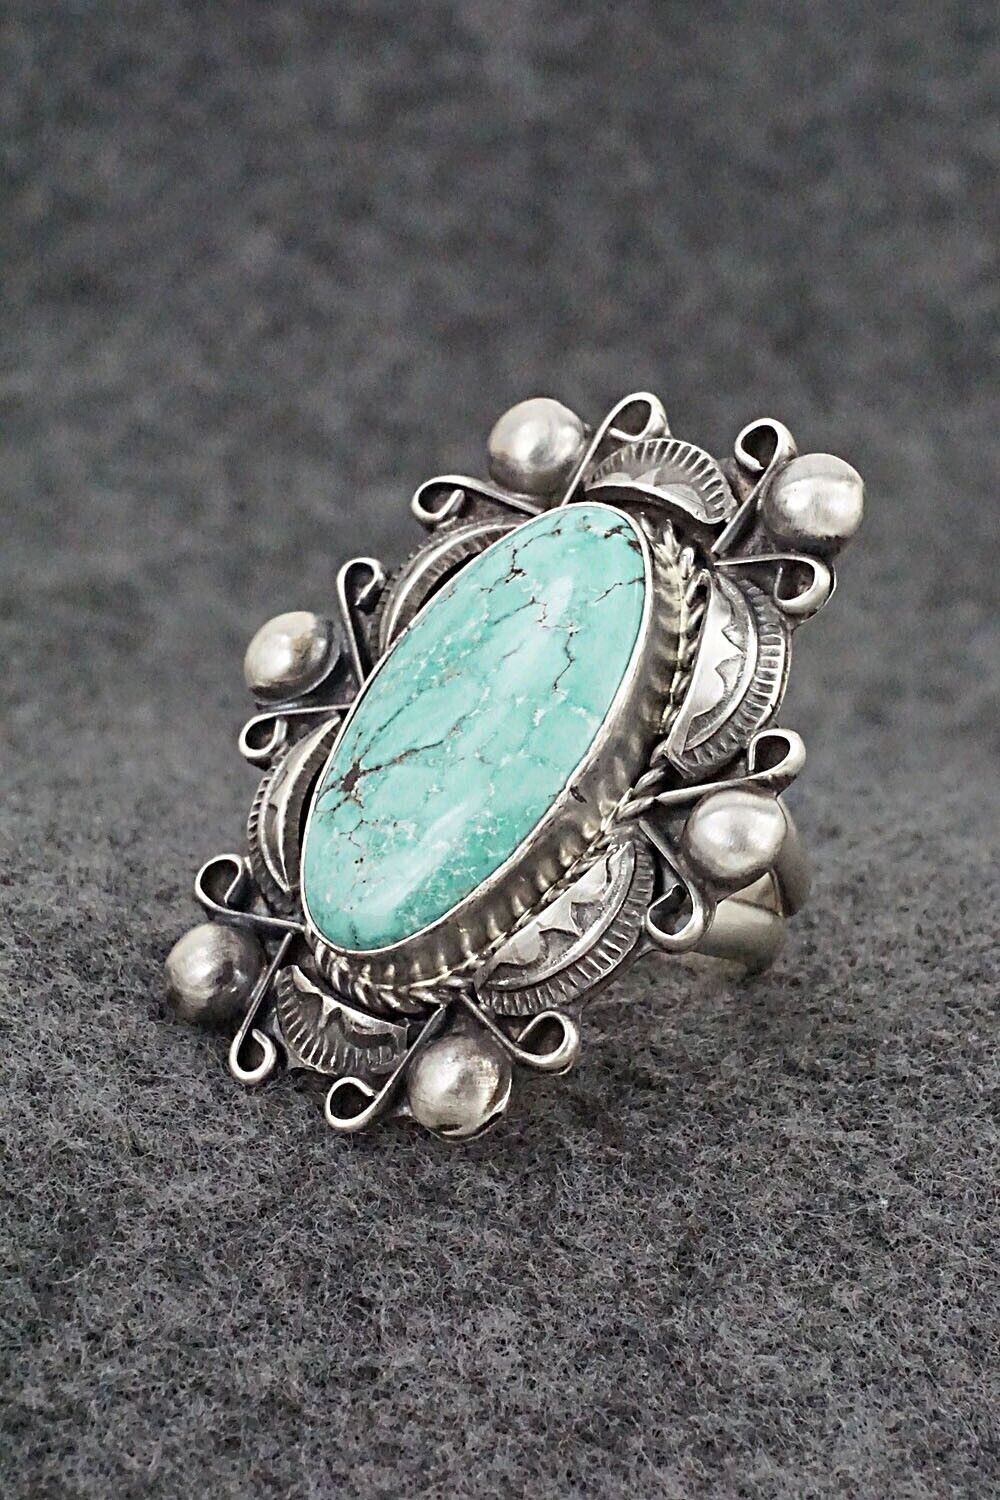 Turquoise & Sterling Silver Ring - Wilson Dawes - Size 7